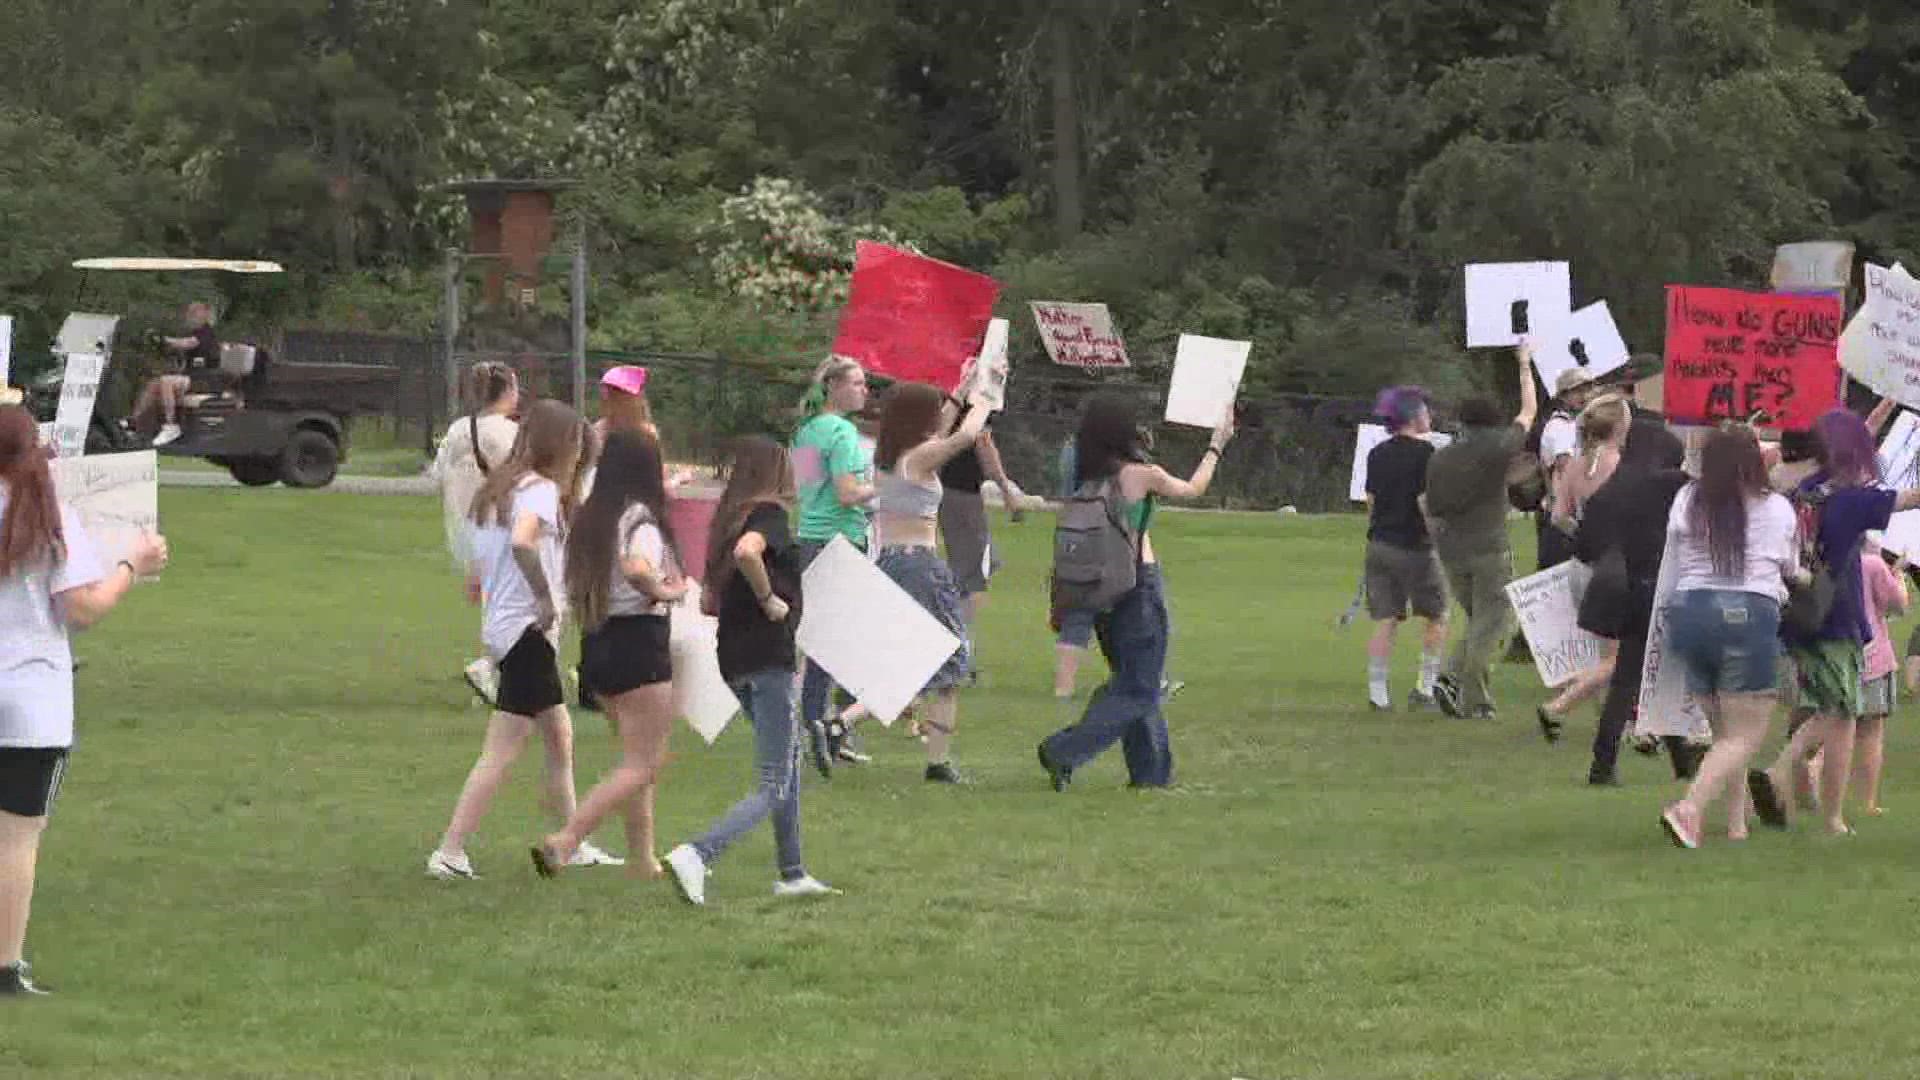 Local advocates say there's more to the fight to protect abortion rights in North Idaho